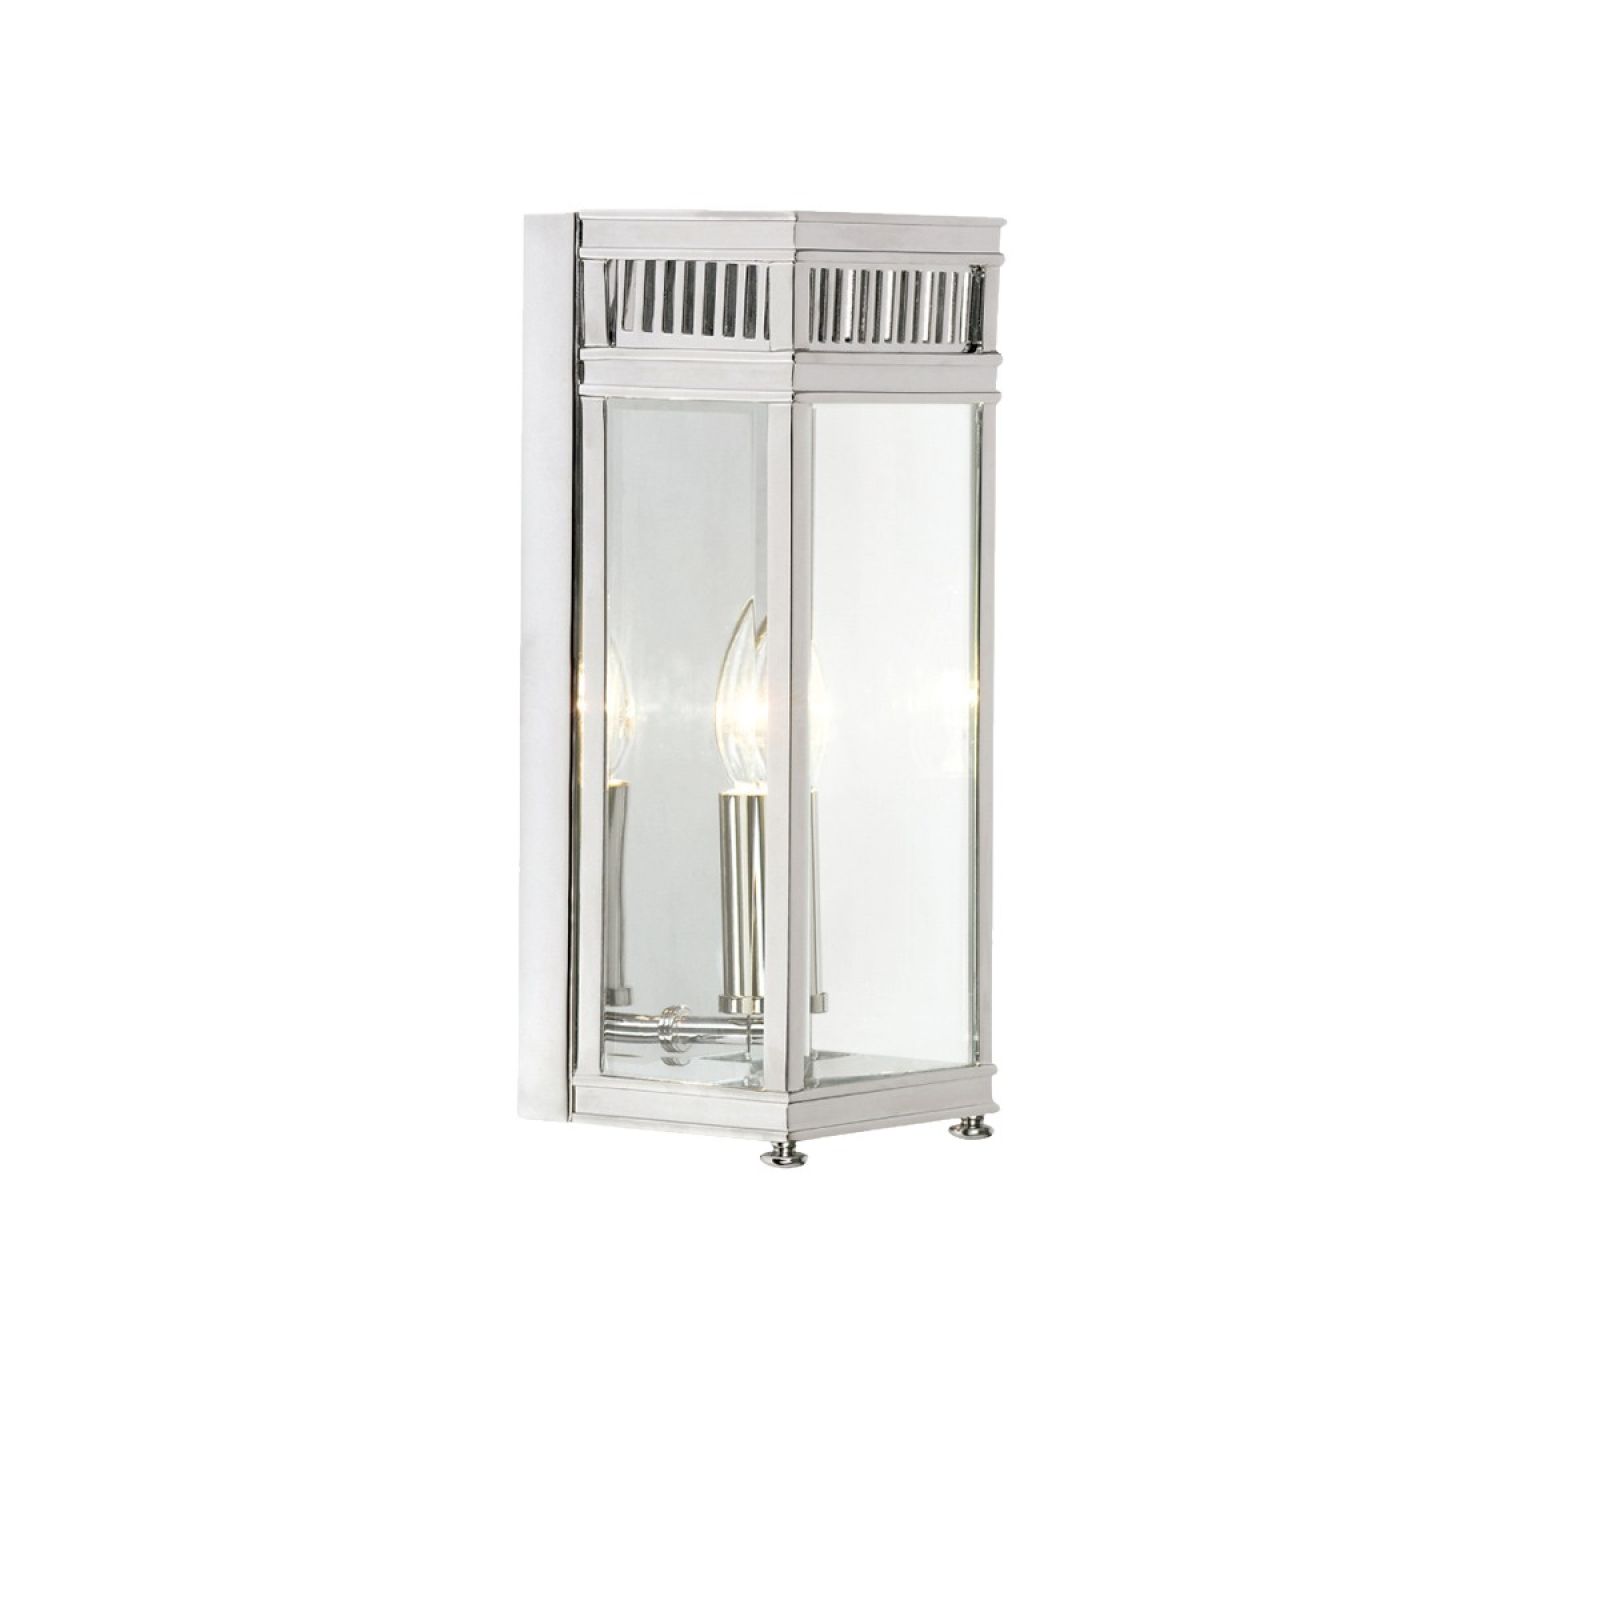 Holborn wall lantern in polished chrome - small